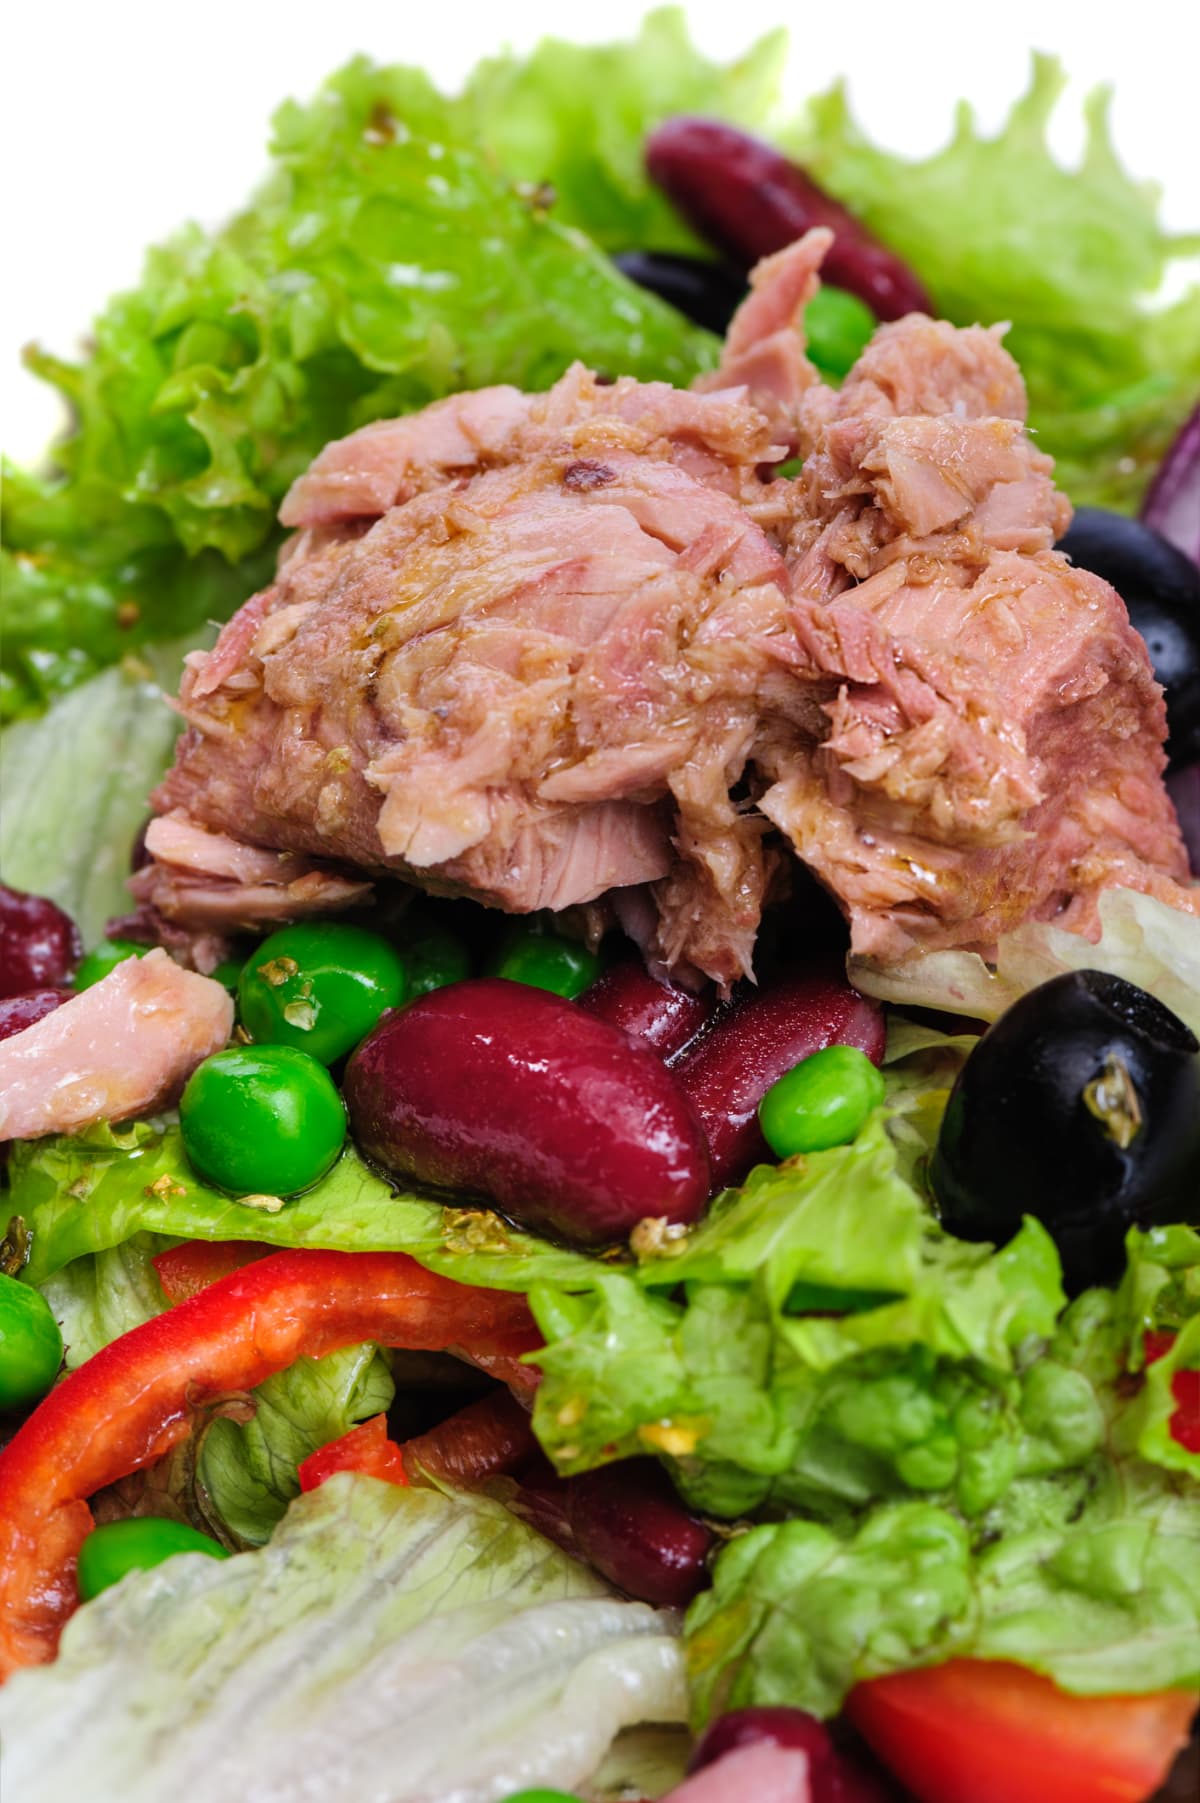 Tuna salad with lettuce, onion, red beans, tomato, green peas and other vegetables